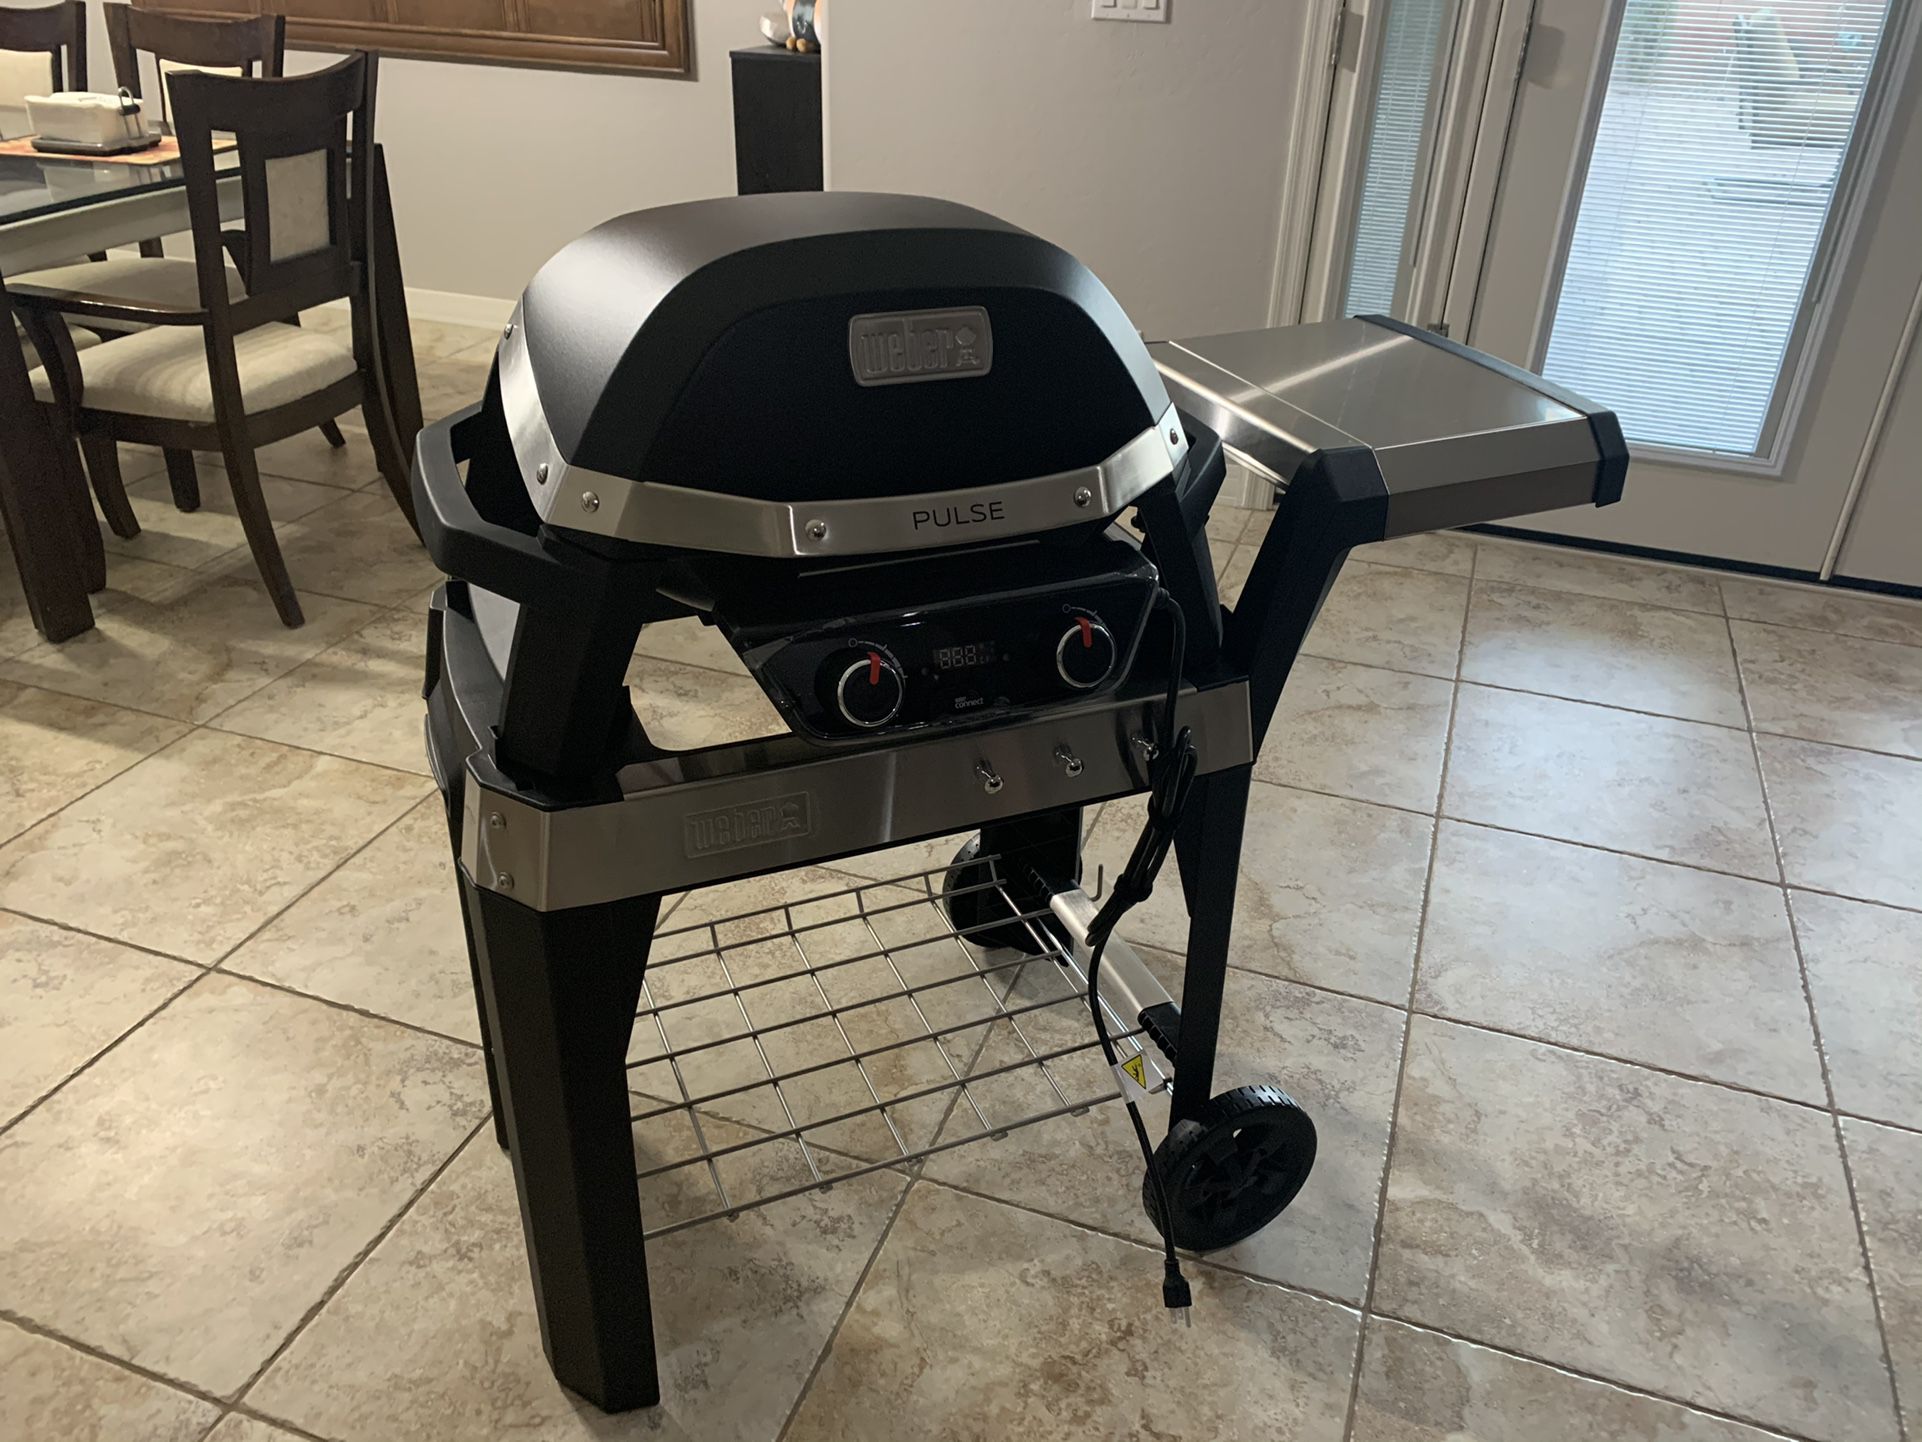 Weber Grill Pulse 2000 Smart Grill with for Sale in AZ - OfferUp